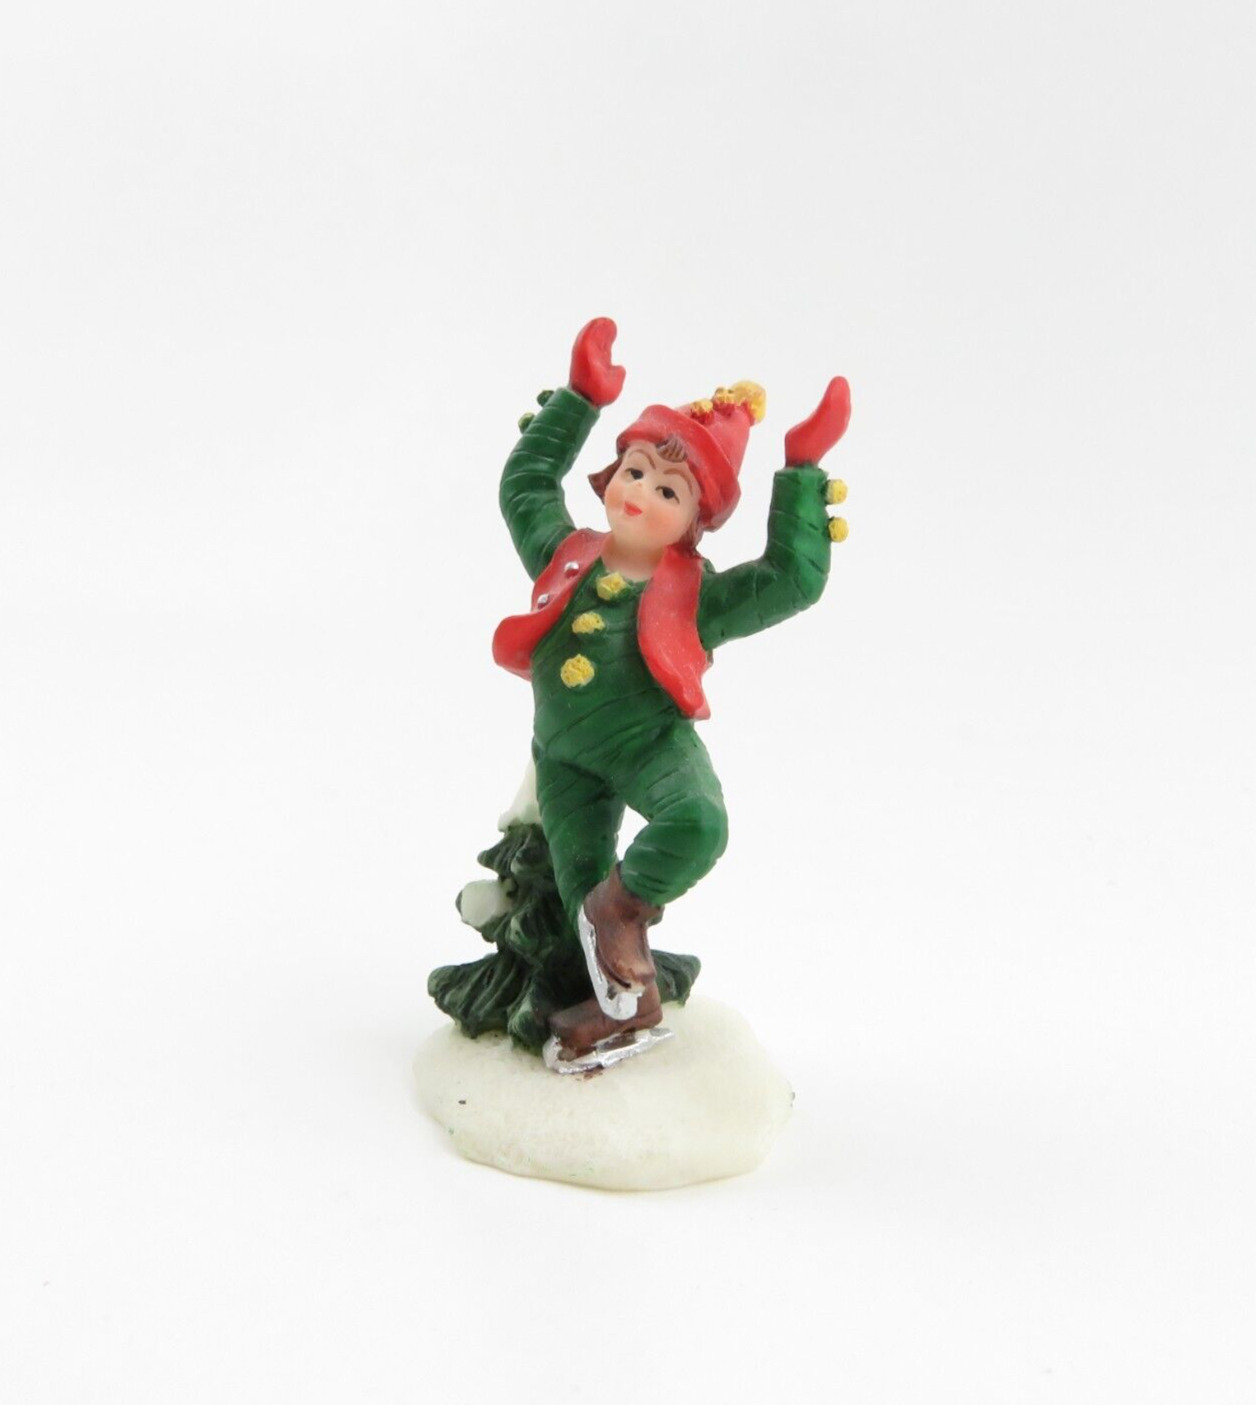 Holiday Time Christmas Village Accessory - Joyous Child on Skates - Bright Color